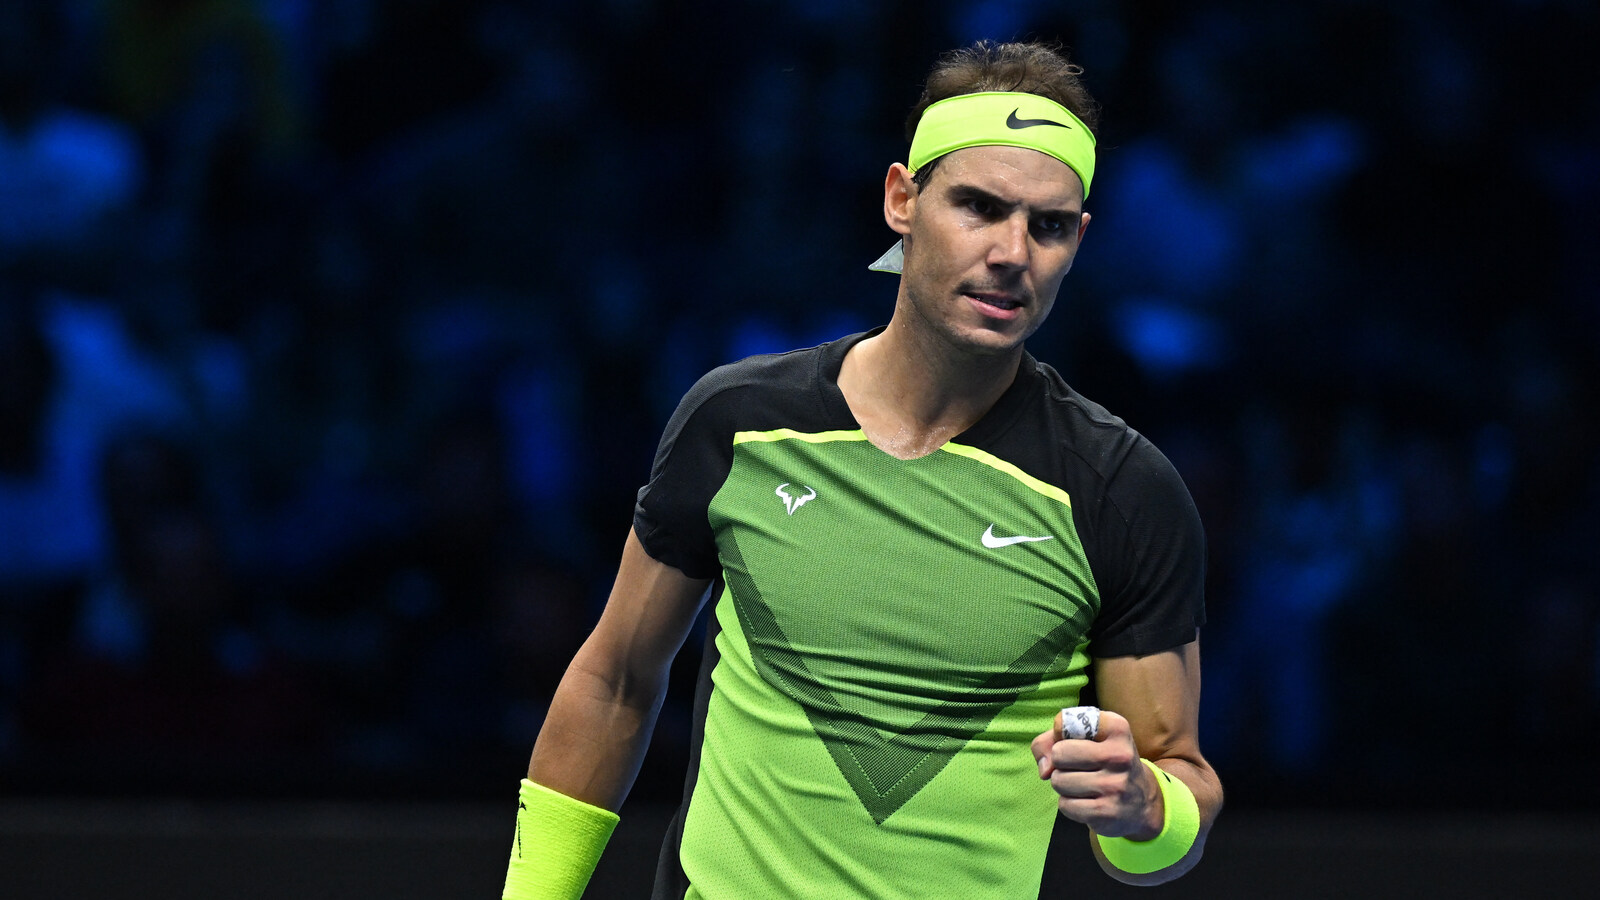 United Cup 2023: Rafael Nadal to begin action in United Cup 2023, to face Cameron Norrie in blockbuster singles encounter as Spain faces Great Britain - Follow Nadal vs Norrie LIVE updates